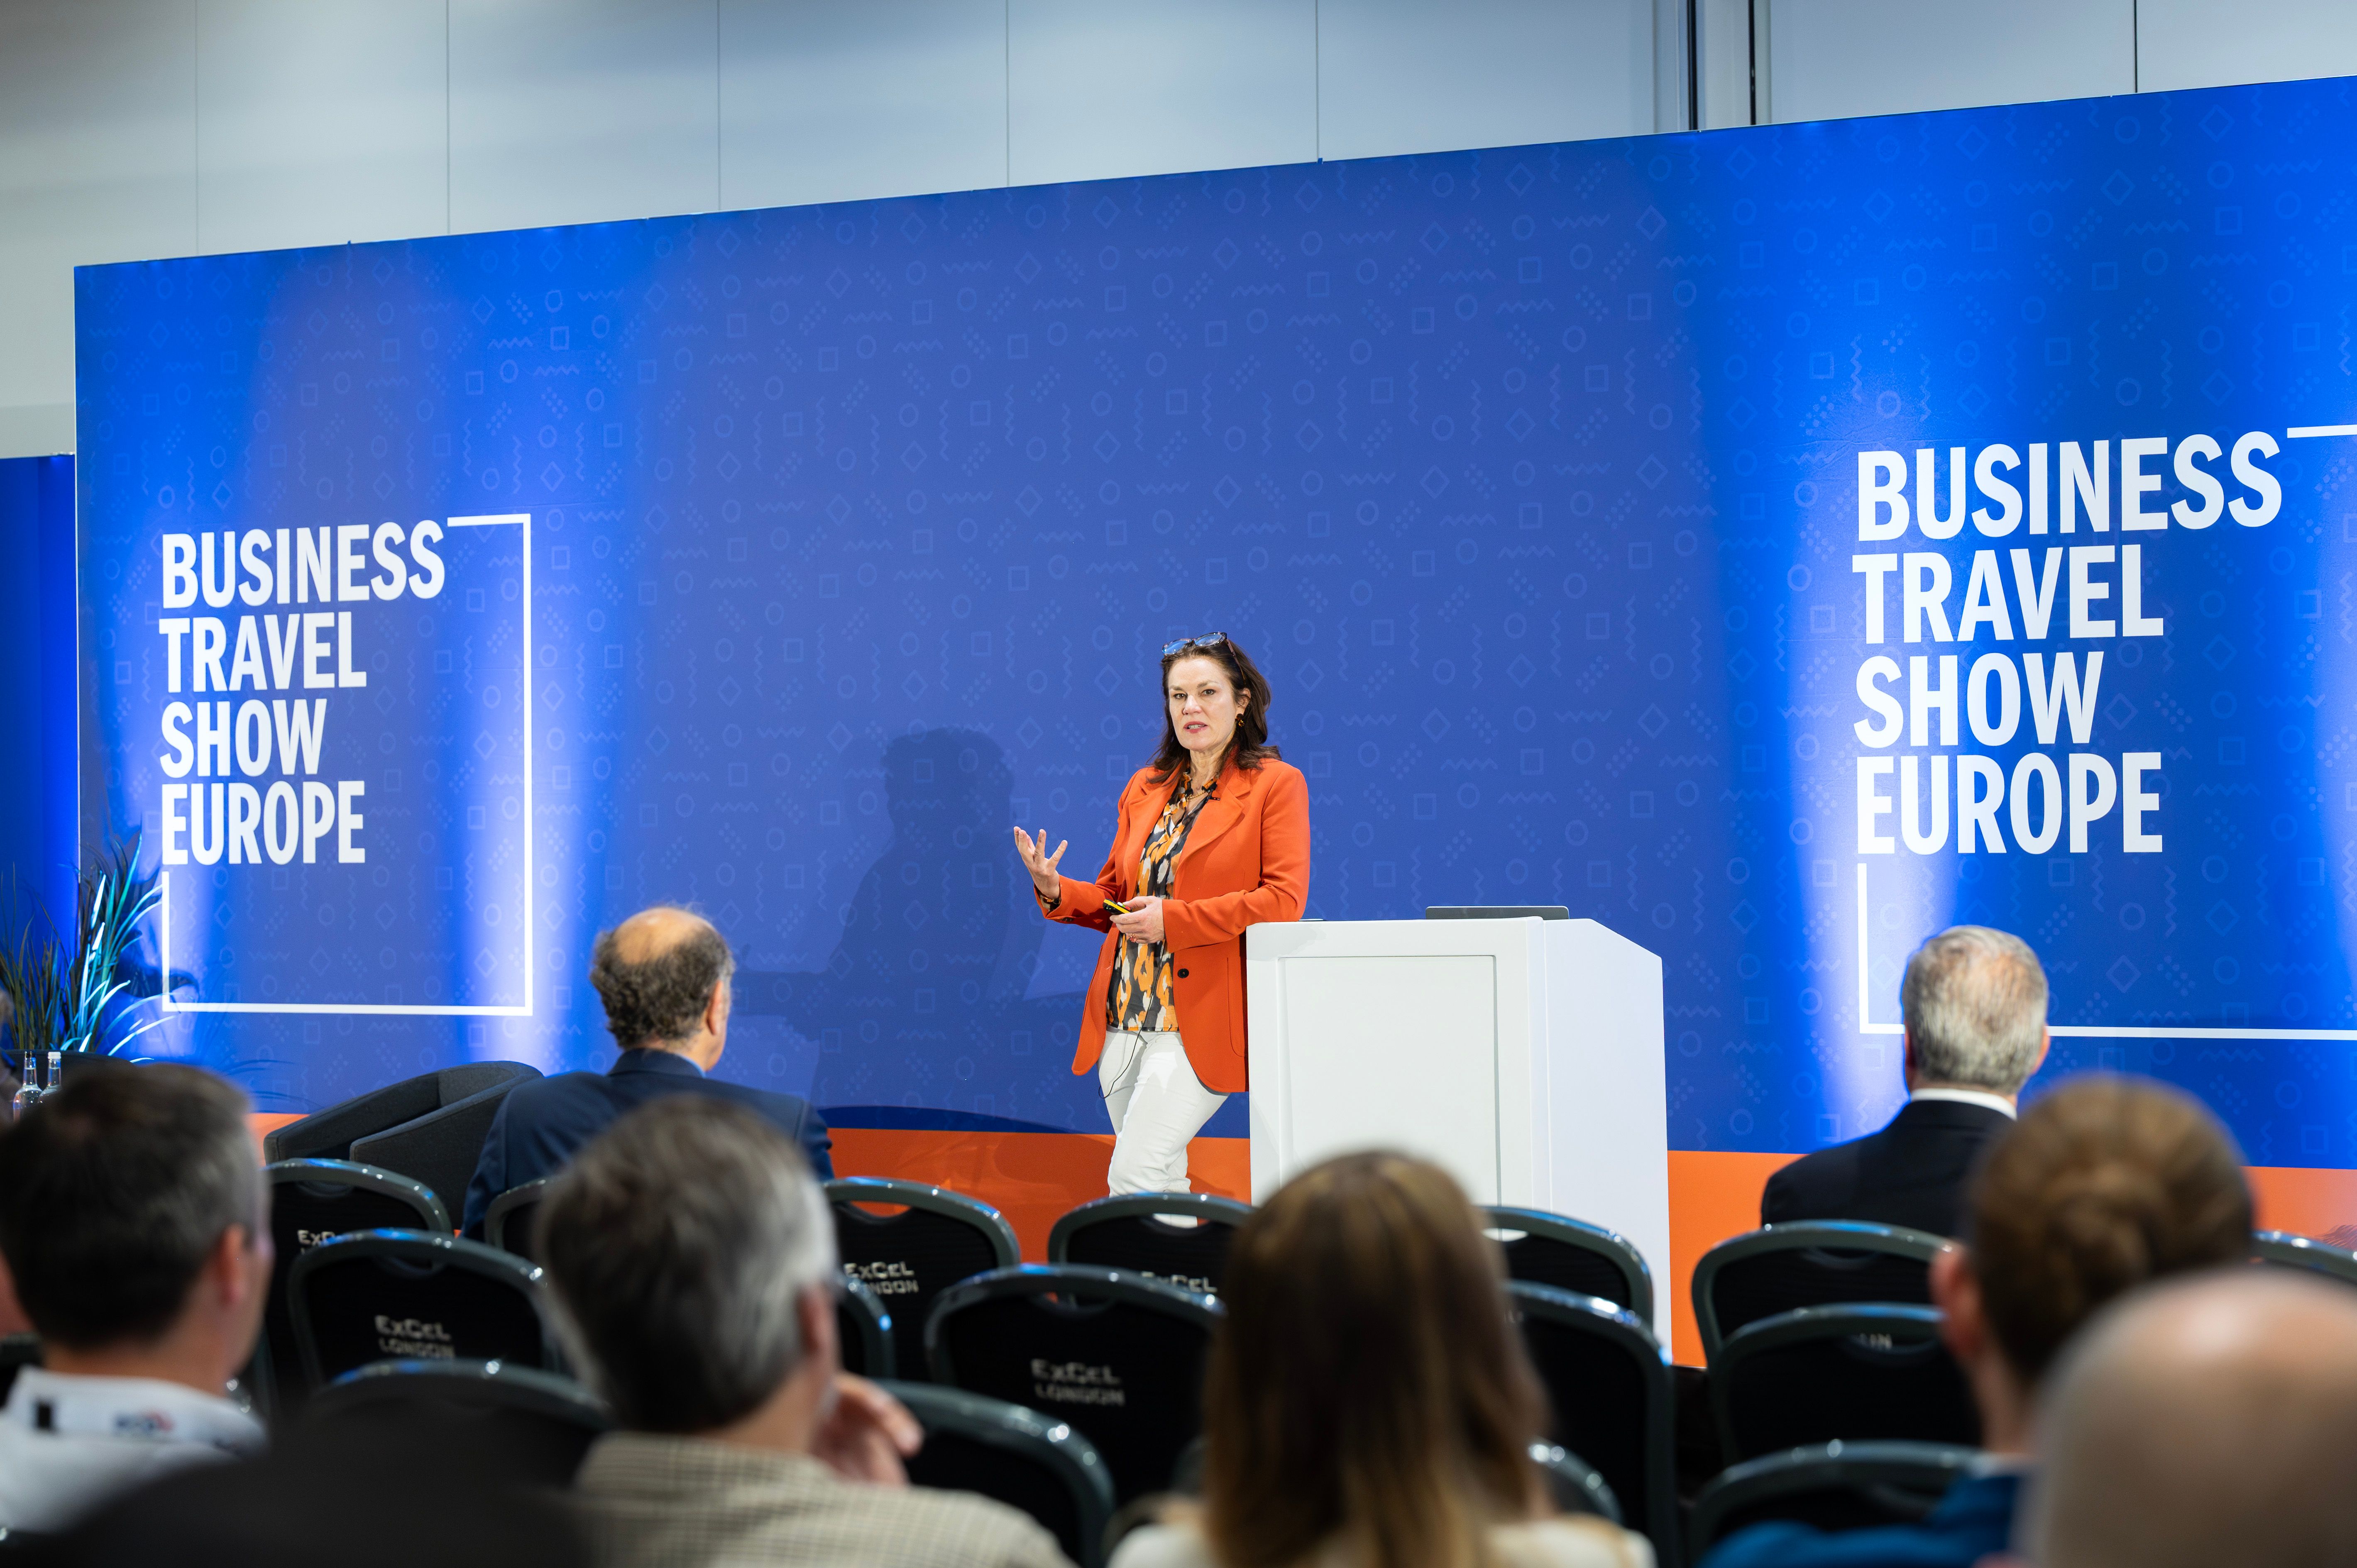 Business Travel Show Europe Kick-Off